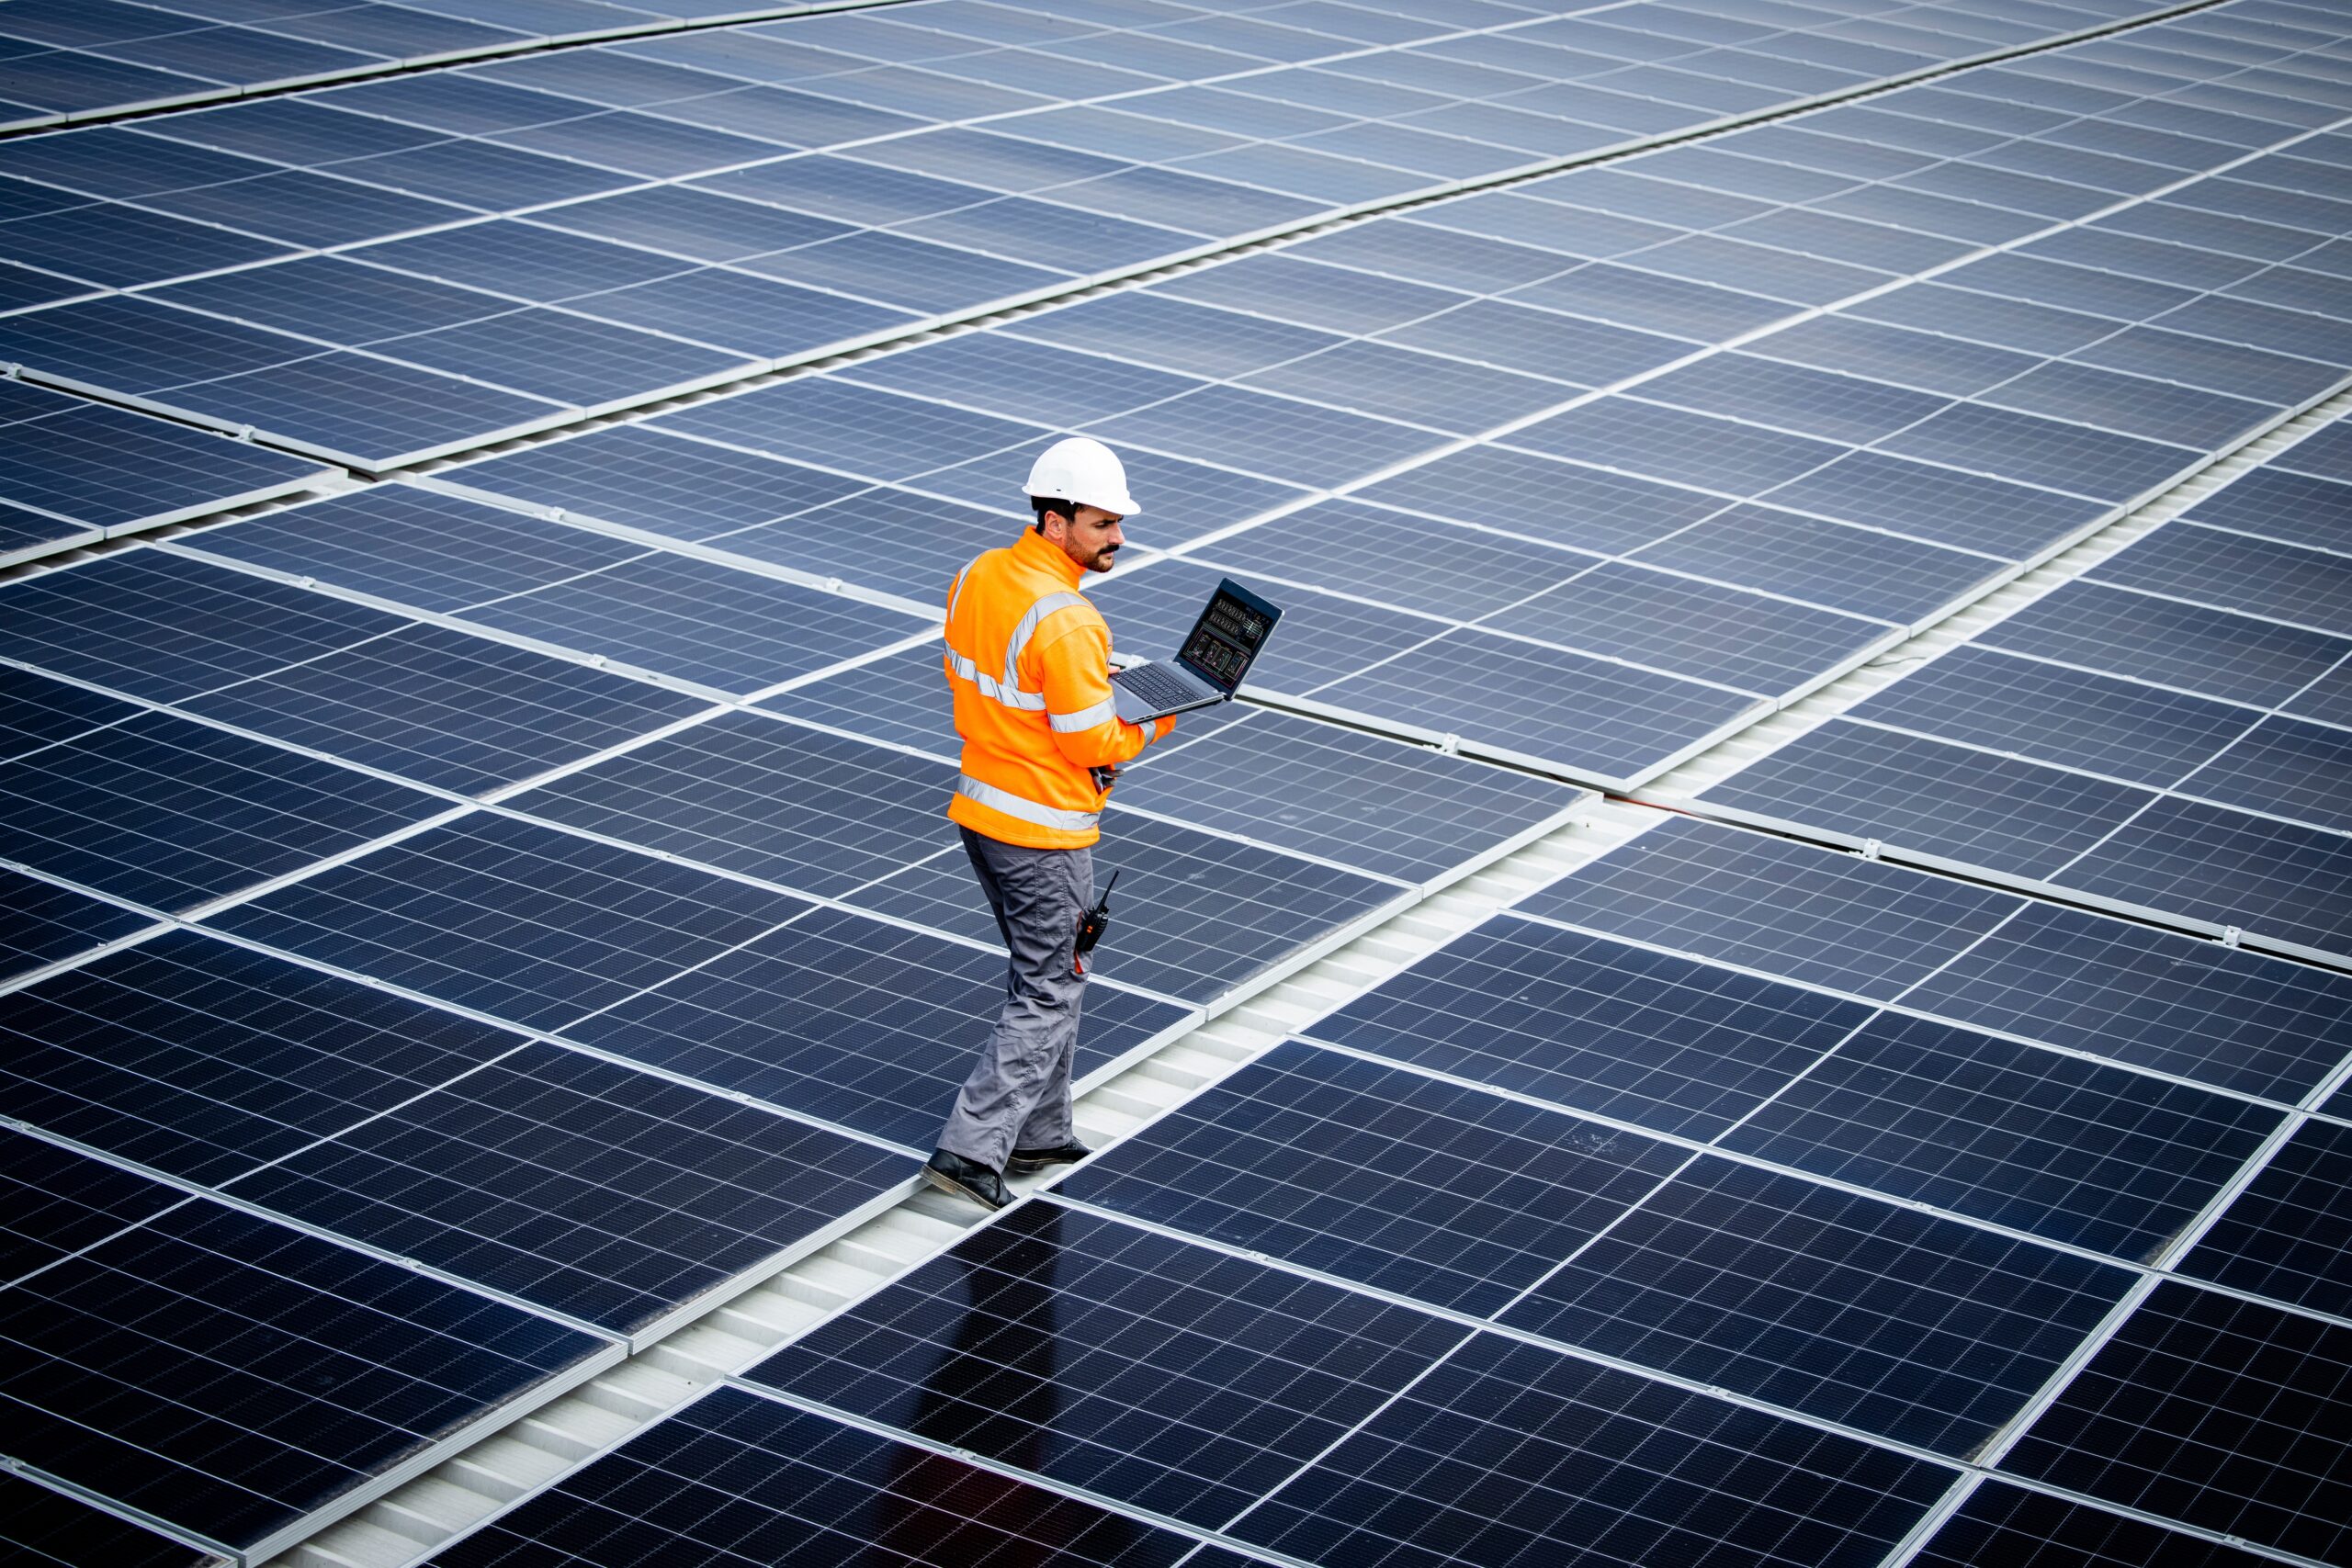 Engineer inspecting solar panels with a laptop at a solar power plant.